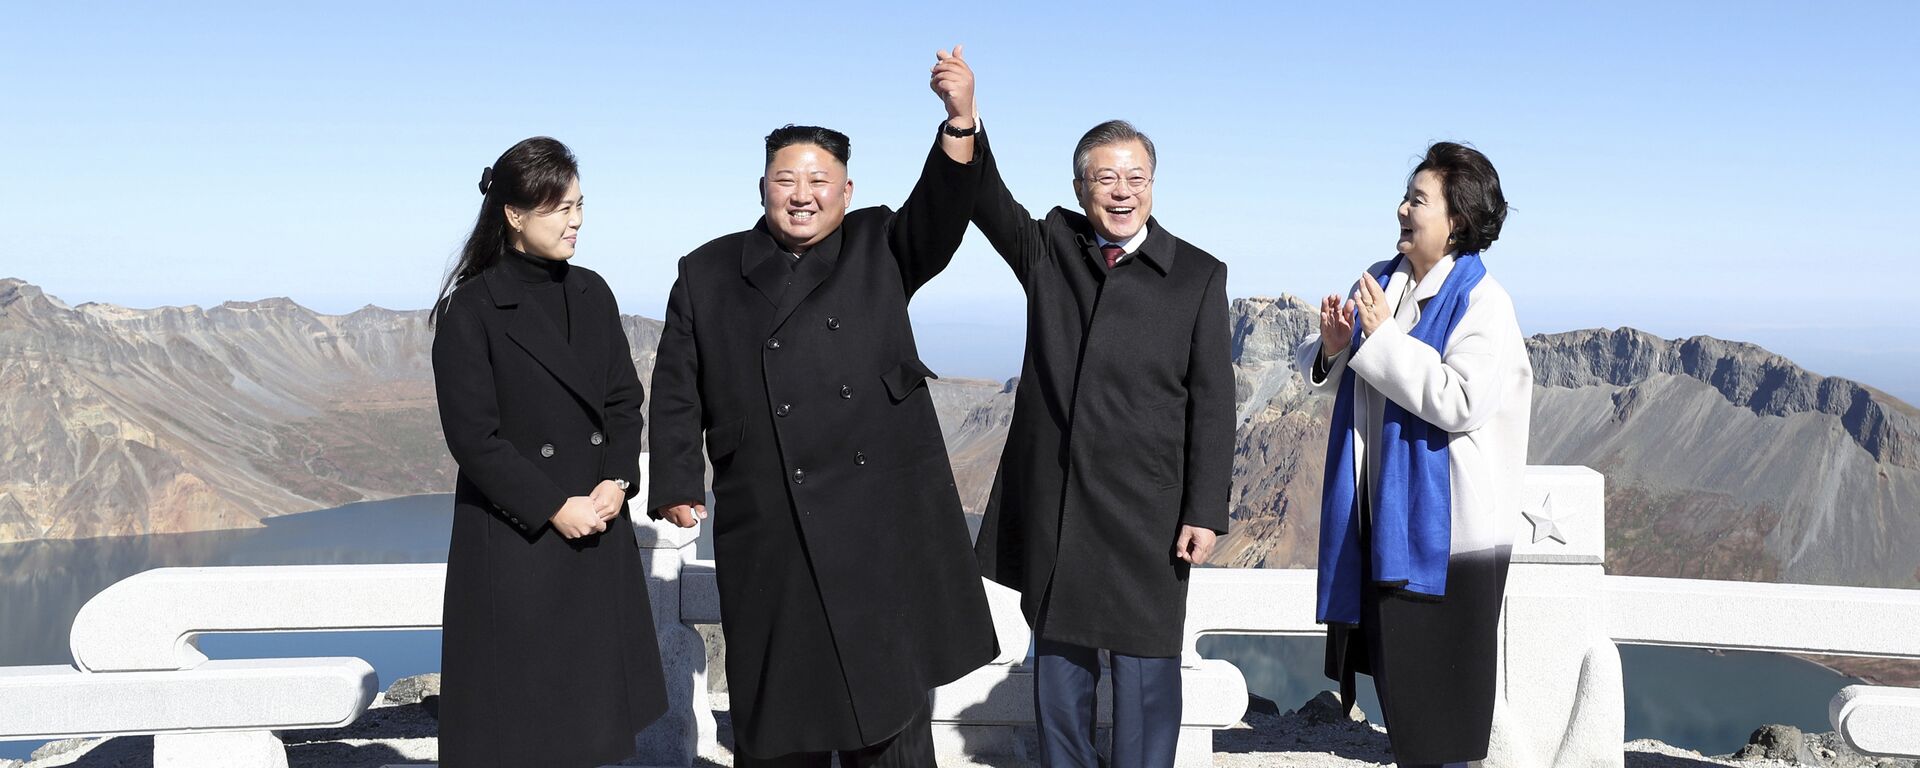 South Korean President Moon Jae-in, second from right, and his wife Kim Jung-sook, right, stand with North Korean leader Kim Jong Un, second from left, and his wife Ri Sol Ju on the Mount Paektu in North Korea, Thursday, Sept. 20, 2018 - Sputnik International, 1920, 09.10.2022